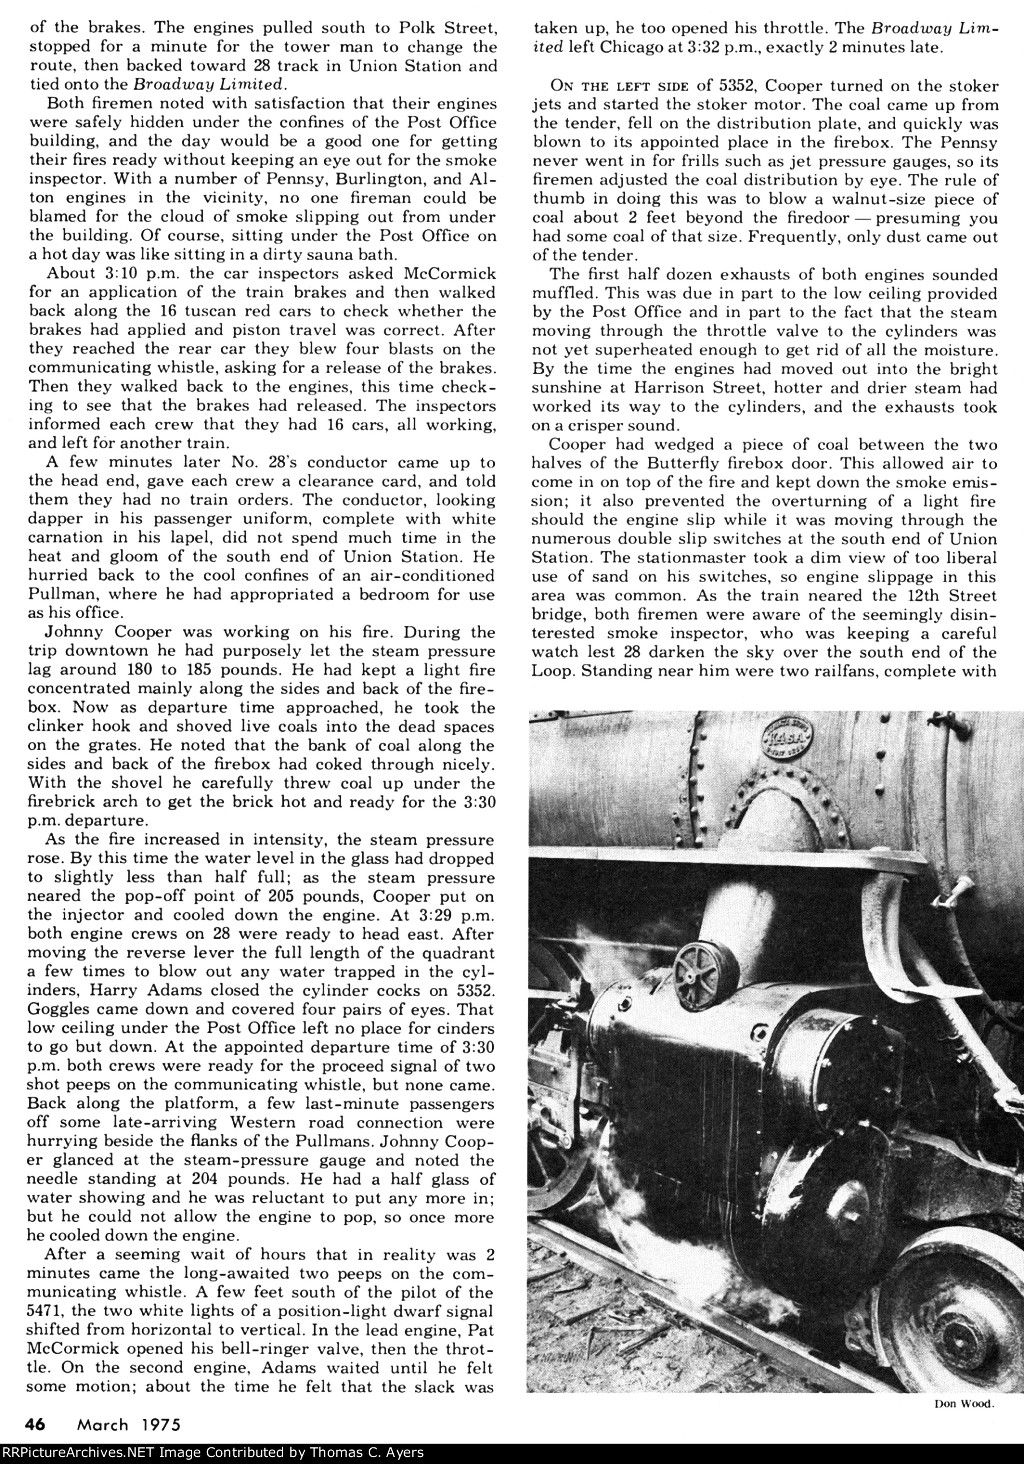 "Second Engine 28," Page 46, 1975